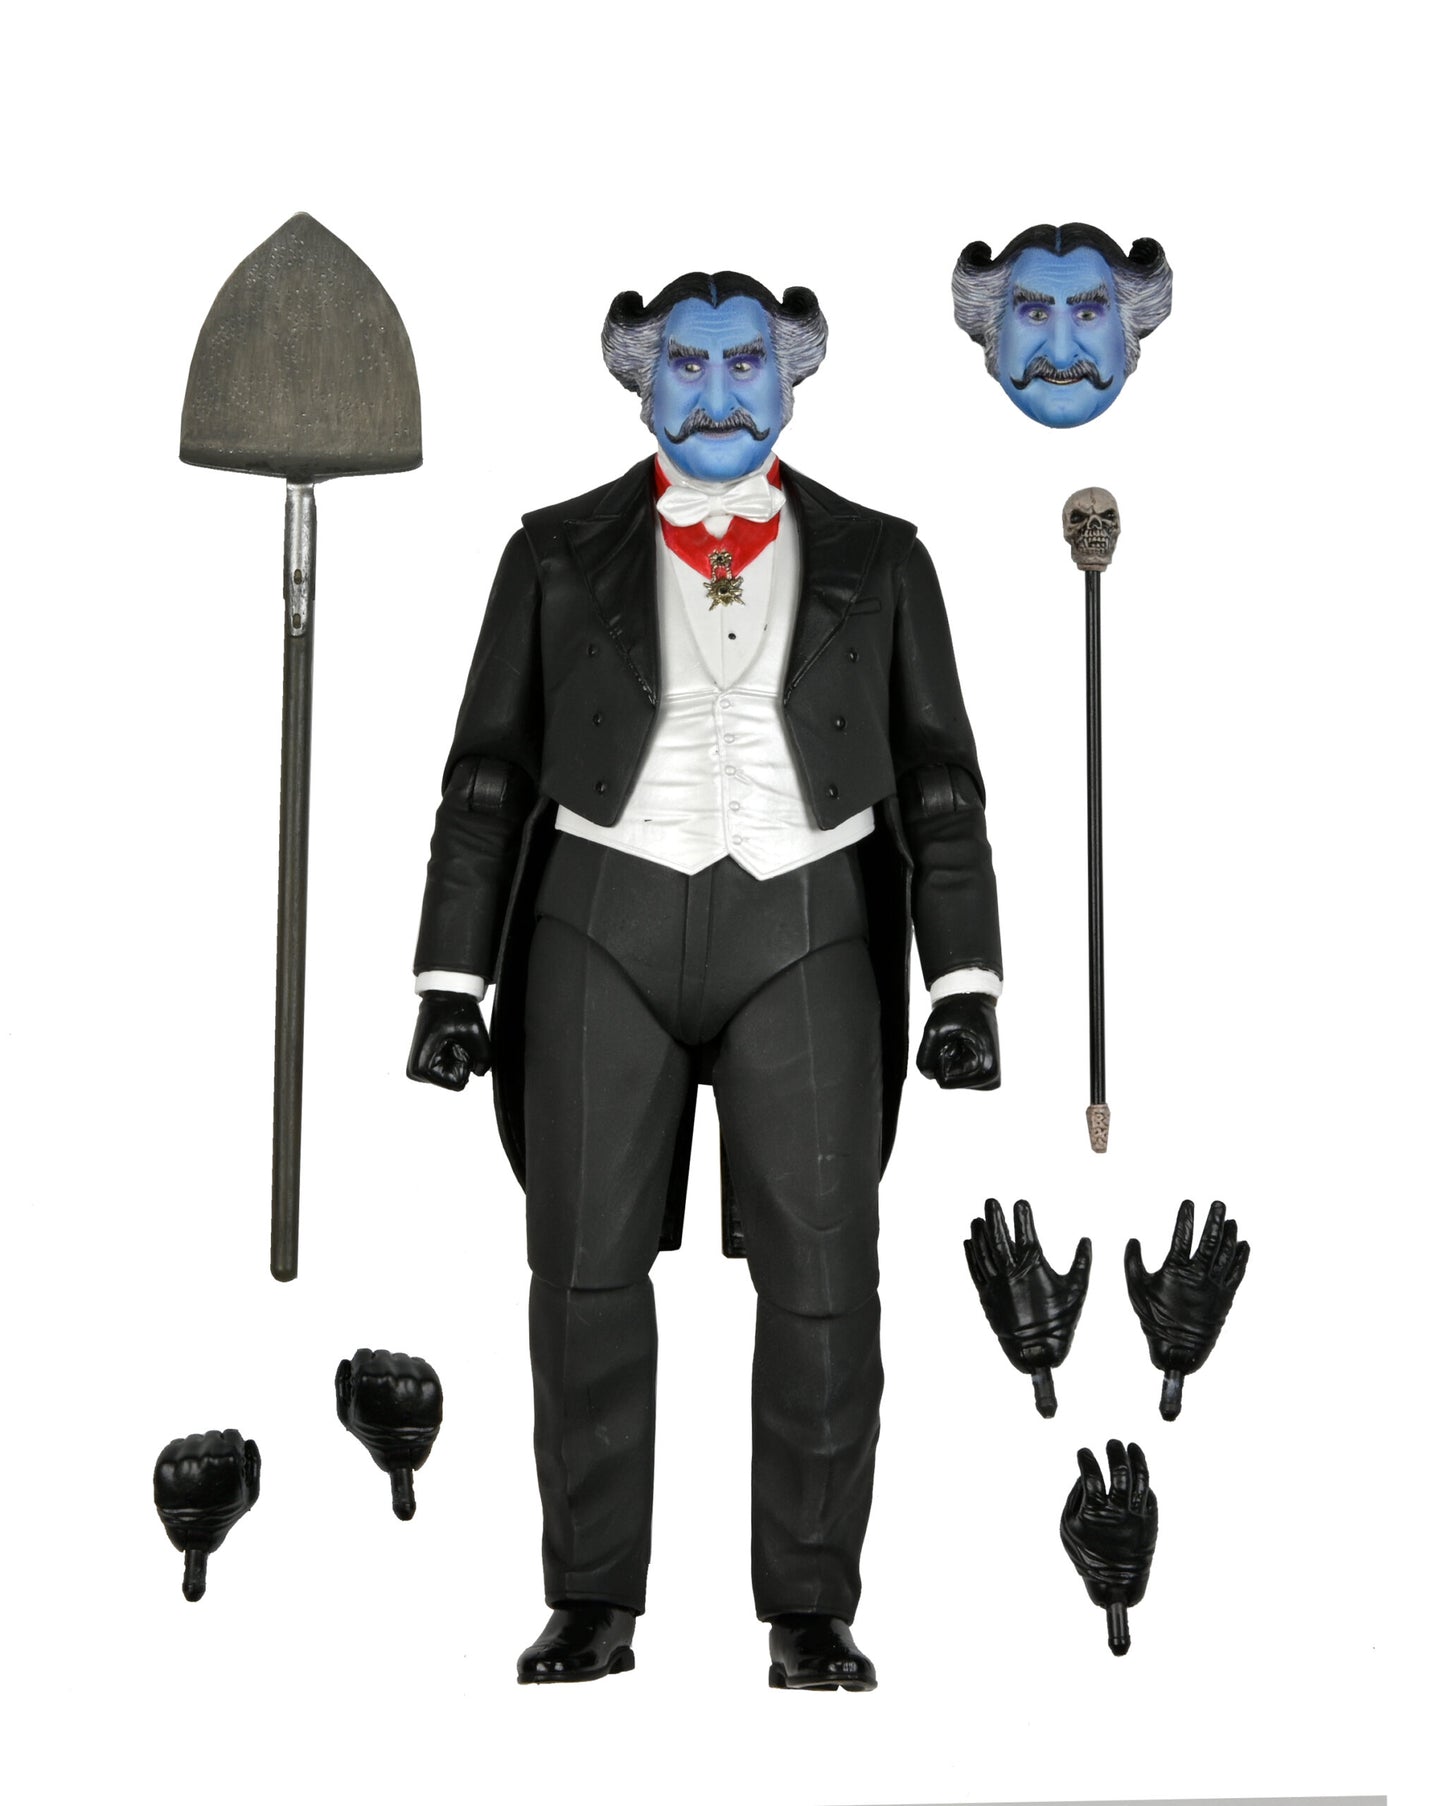 ROB ZOMBIE THE MUNSTERS - 7 IN SCALE ACTION FIGURE – ULTIMATE THE COUNT (ETA MAY / JUNE 2023)